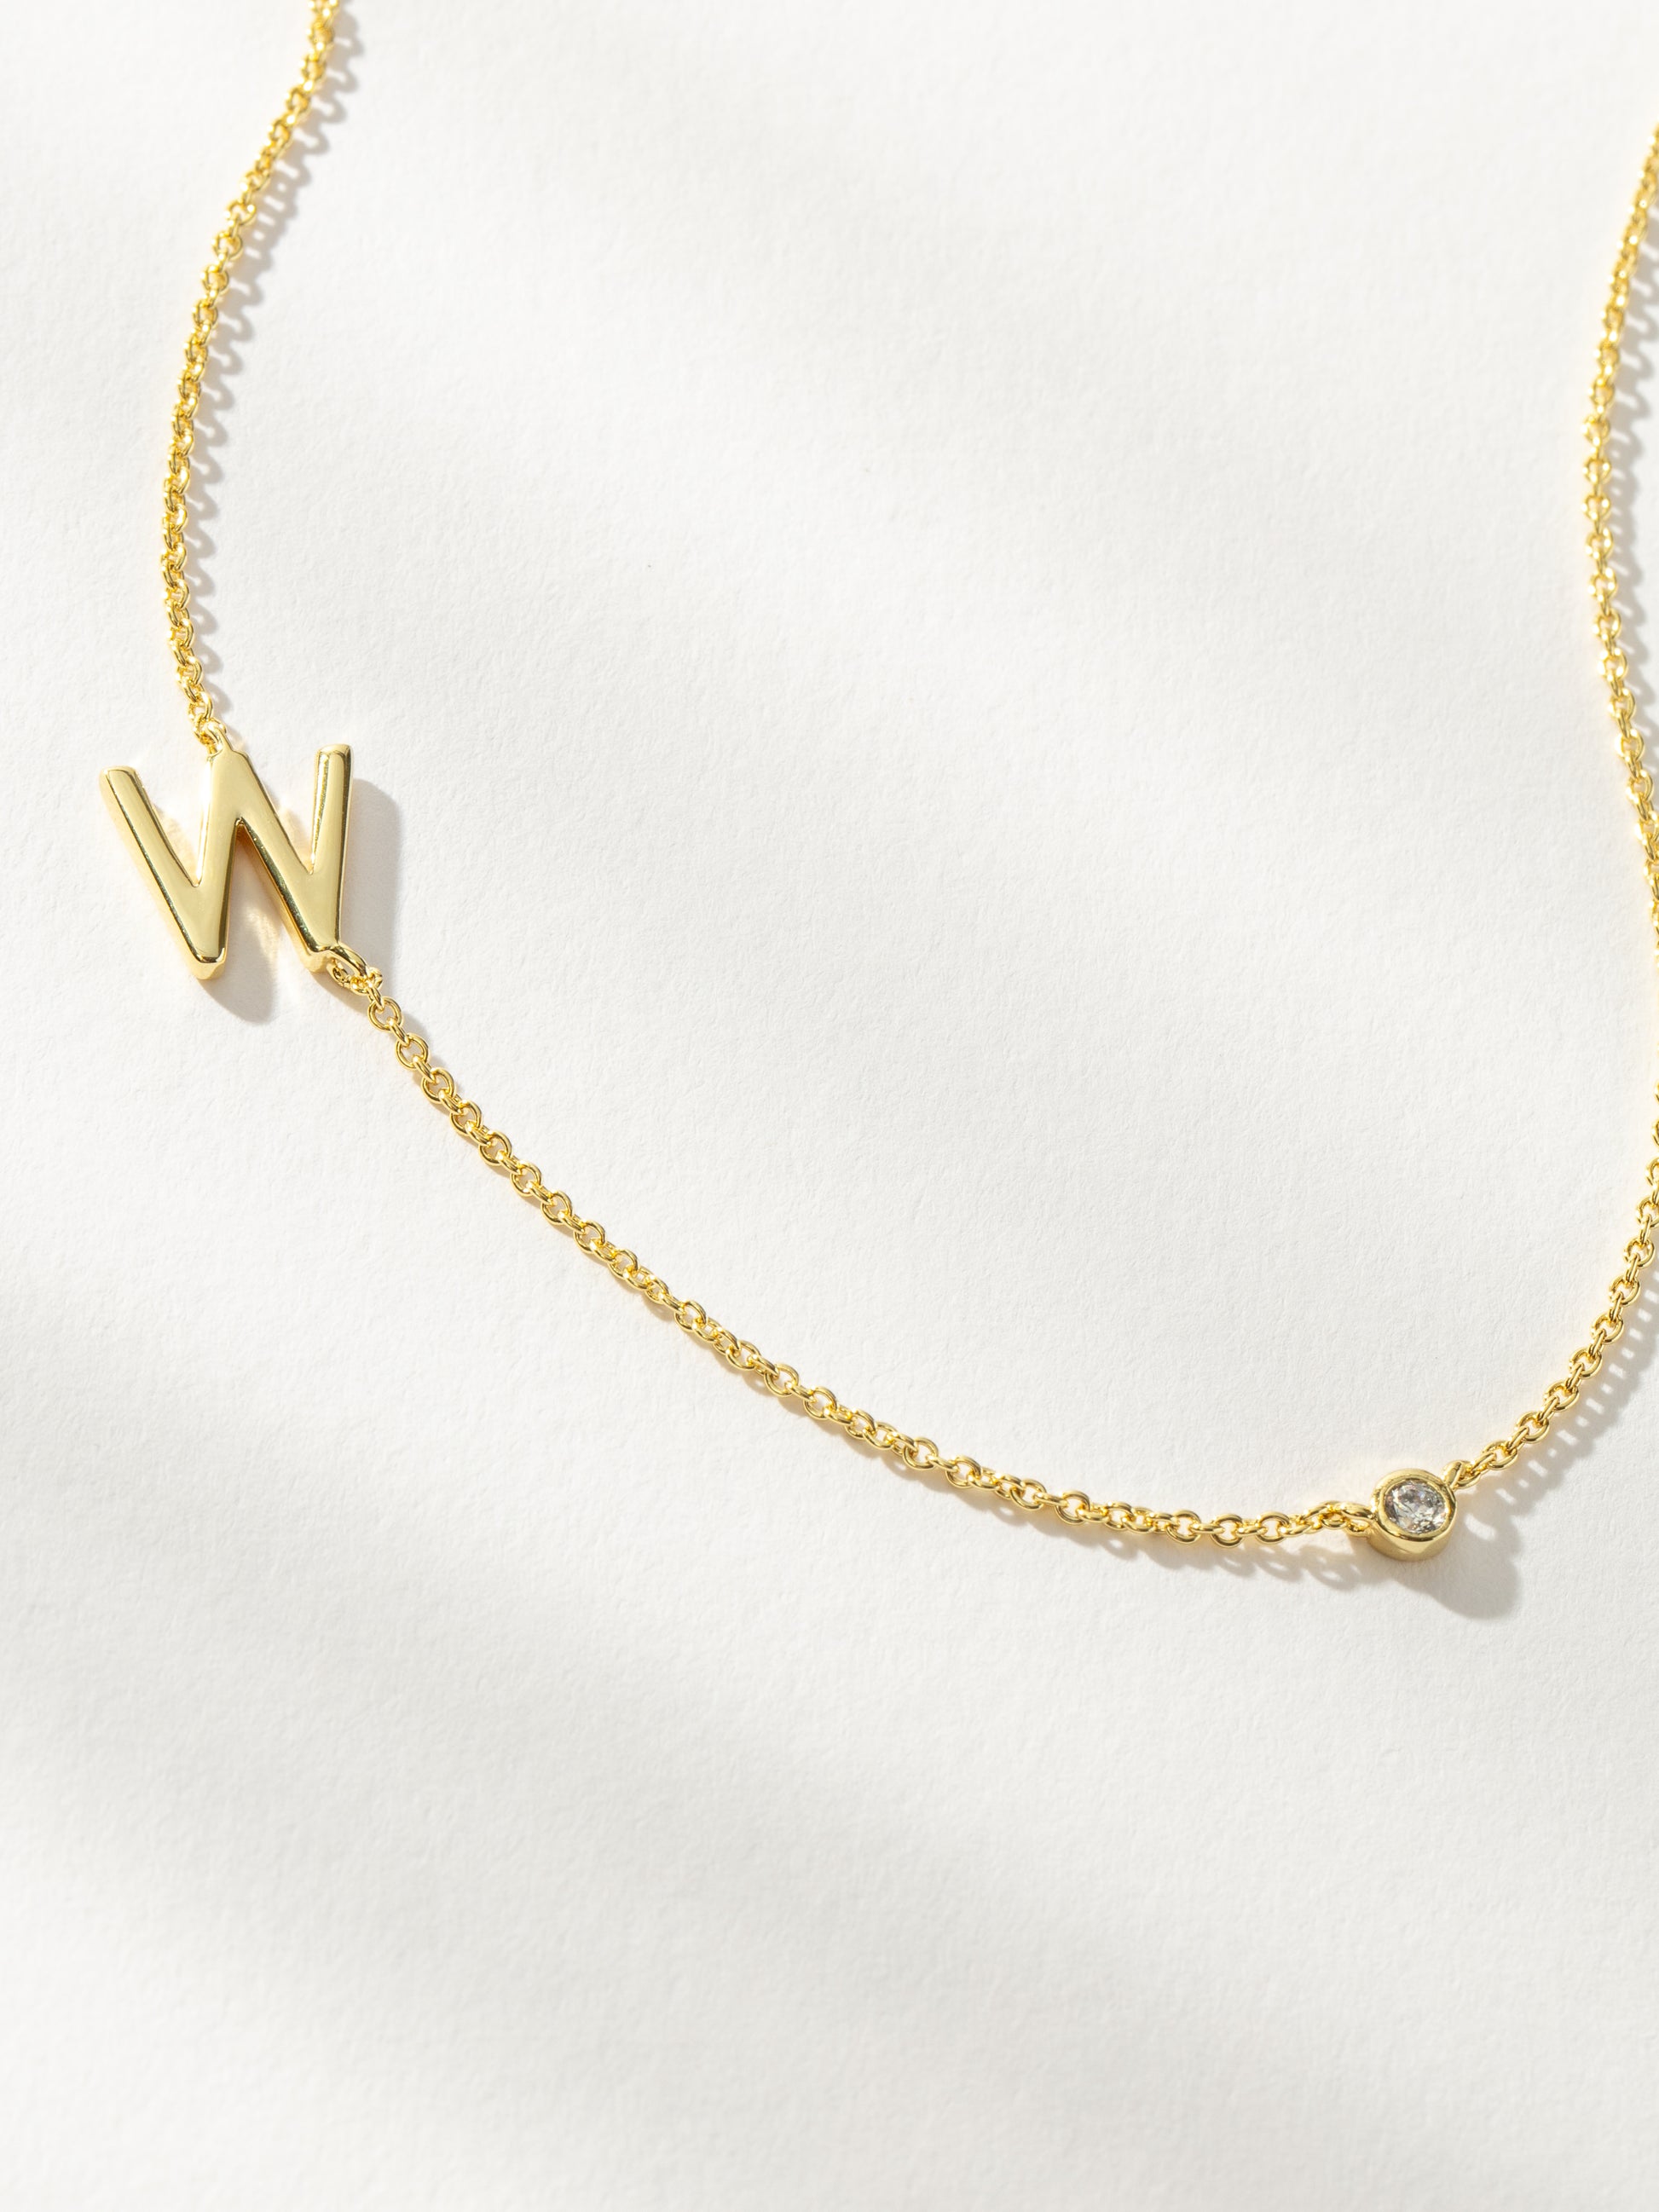 Personalized Touch Necklace | Gold W | Product Image | Uncommon James